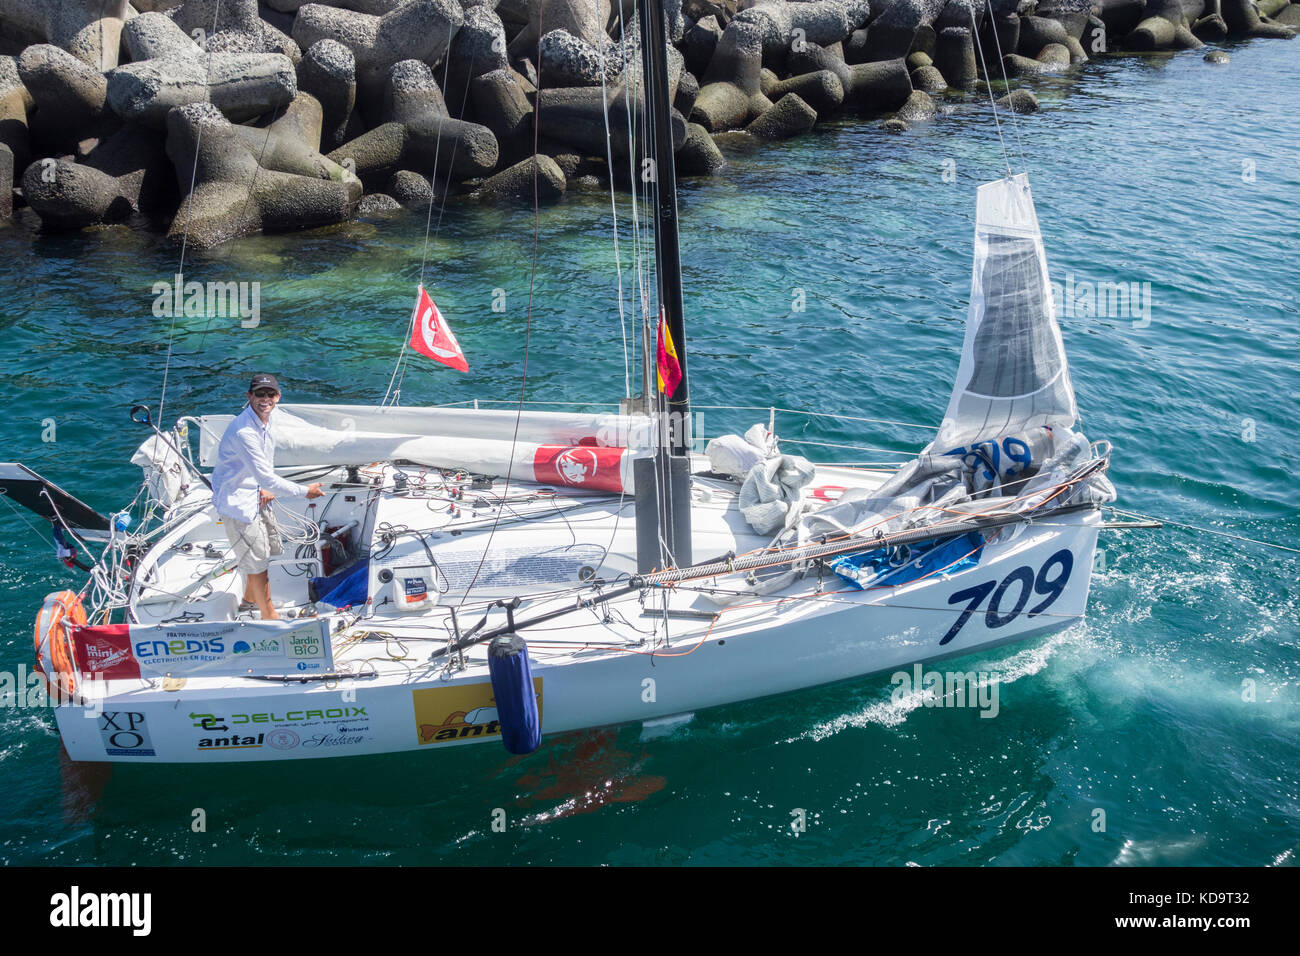 Las Palmas, Gran Canaria, Canary Islands, Spain.11th October, 2017. French sailor, Arthur Leopold Leger, in his yacht, Antal Expo, is the second yacht to arrive in Las Palmas, on thr first leg of the trans Atlantic `Minitransat` race . Around eighty yachts left La Rochelle in France on 1st October. The race is for single handed Mini 650 class yachts. First leg is La Rochelle to Las Palmas. Second leg, Las Palmas to Martinique in the Carribean. Credit: ALAN DAWSON/Alamy Live News Stock Photo